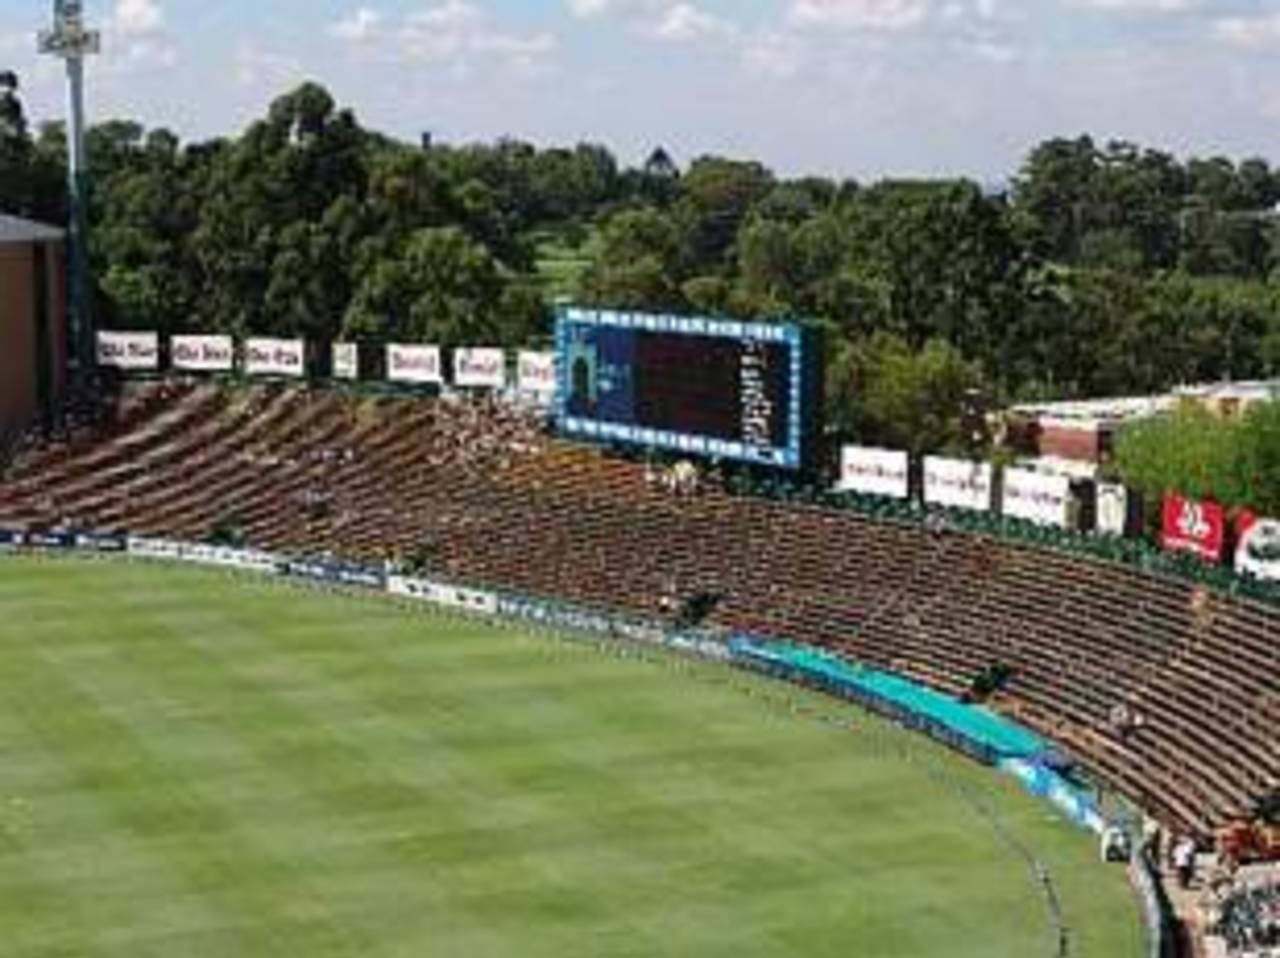 Not much wandering at The Wanderers, 1st ODI, South Africa v Zimbabwe, February 25, 2005